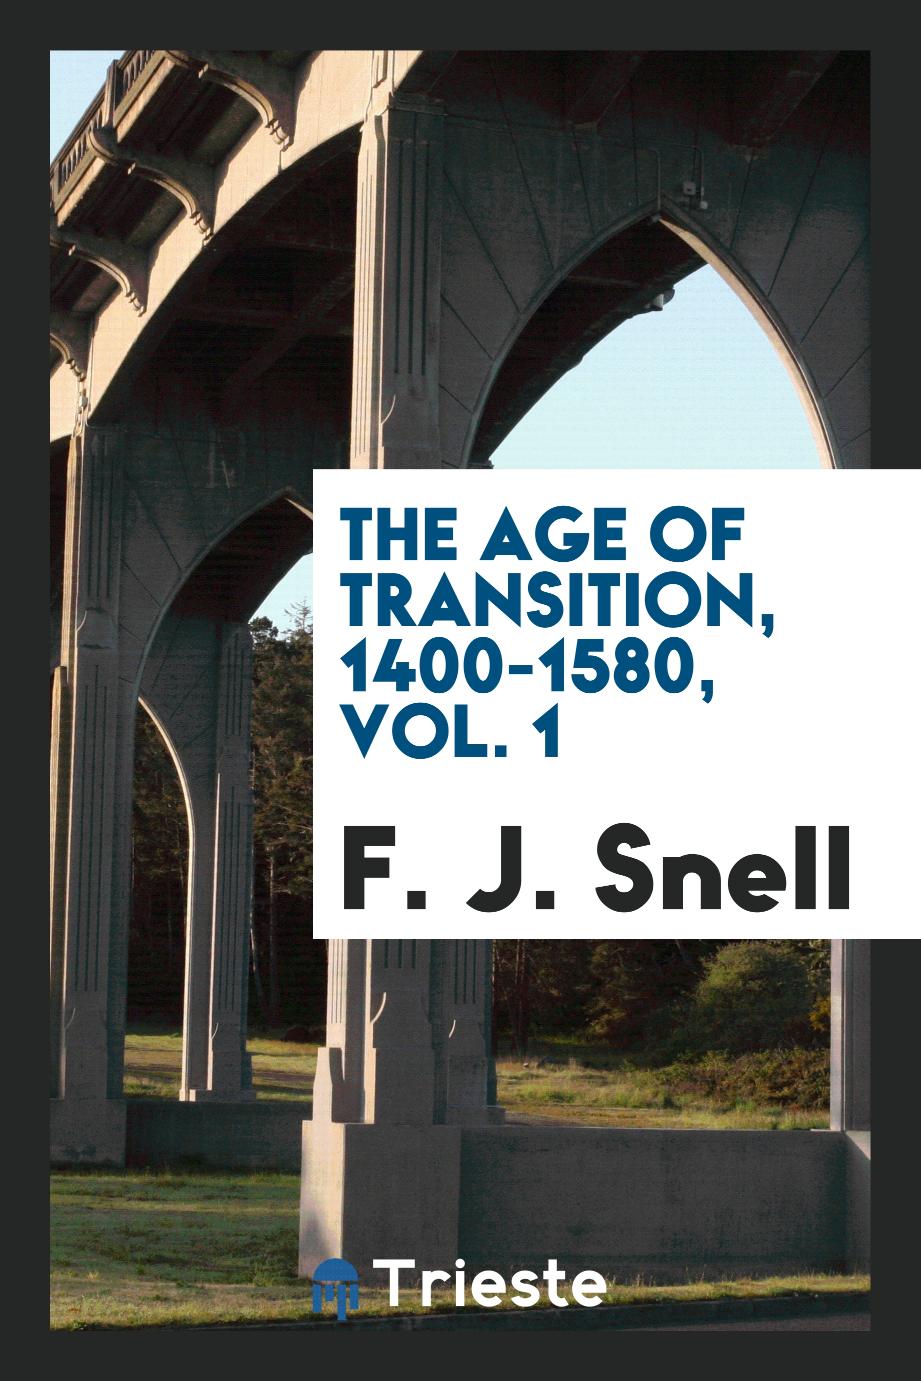 The age of transition, 1400-1580, Vol. 1